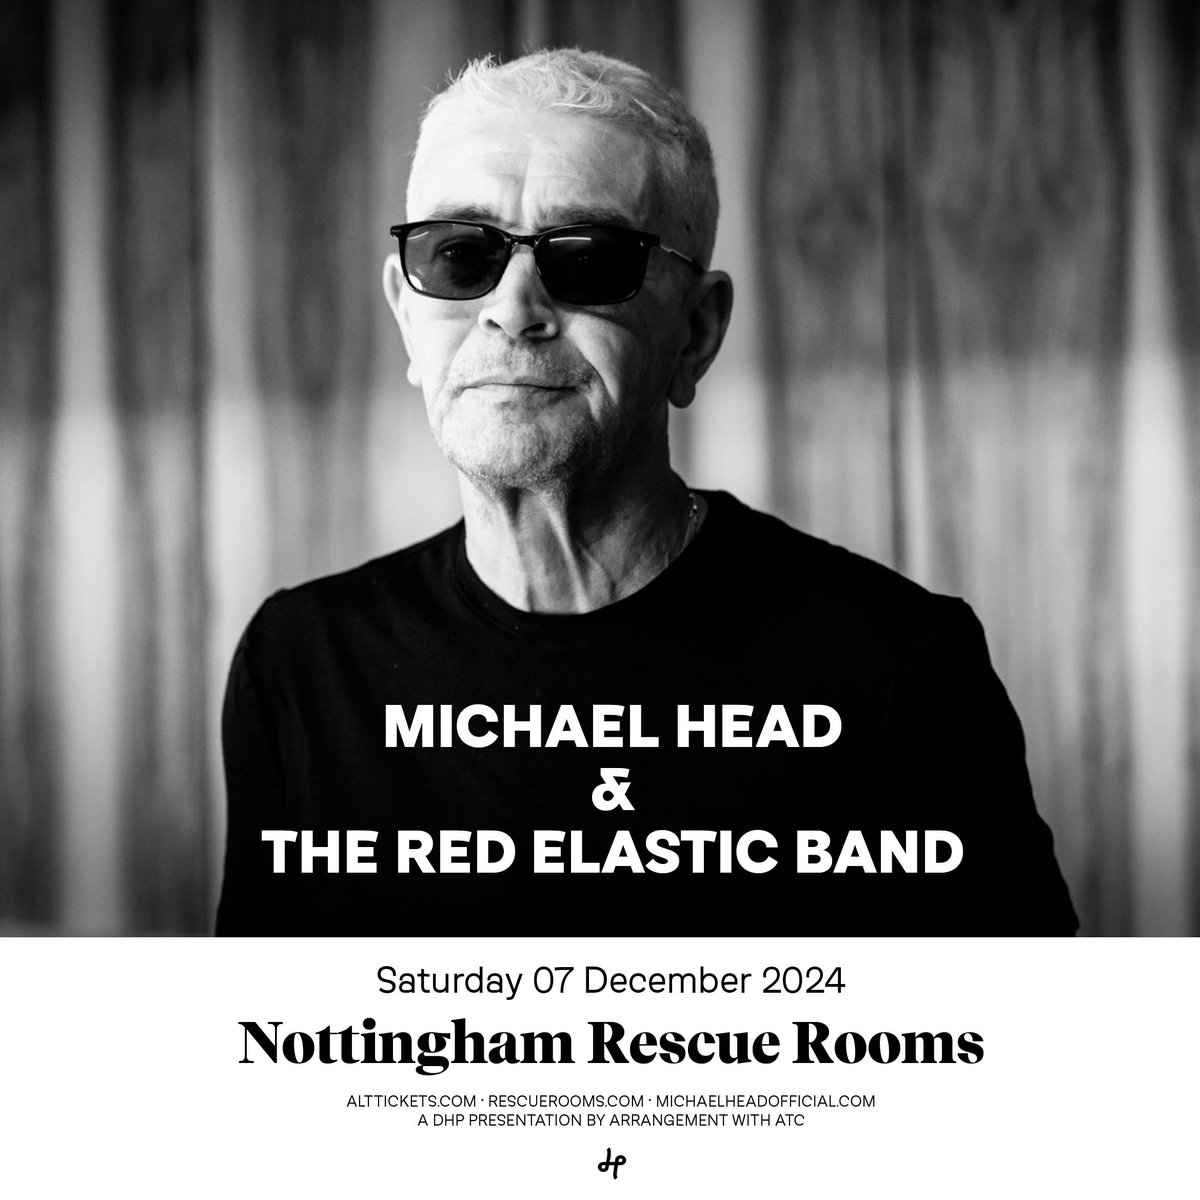 A gifted songwriter, Liverpool musician @michaelheadtreb has just released new album 'Loophole' (9/10 Uncut, 4/5 MOJO), and announced shows at @theklabristol and @rescuerooms in December! Tickets go on sale this Friday at 10am, set a reminder: tinyurl.com/4c6f64nz